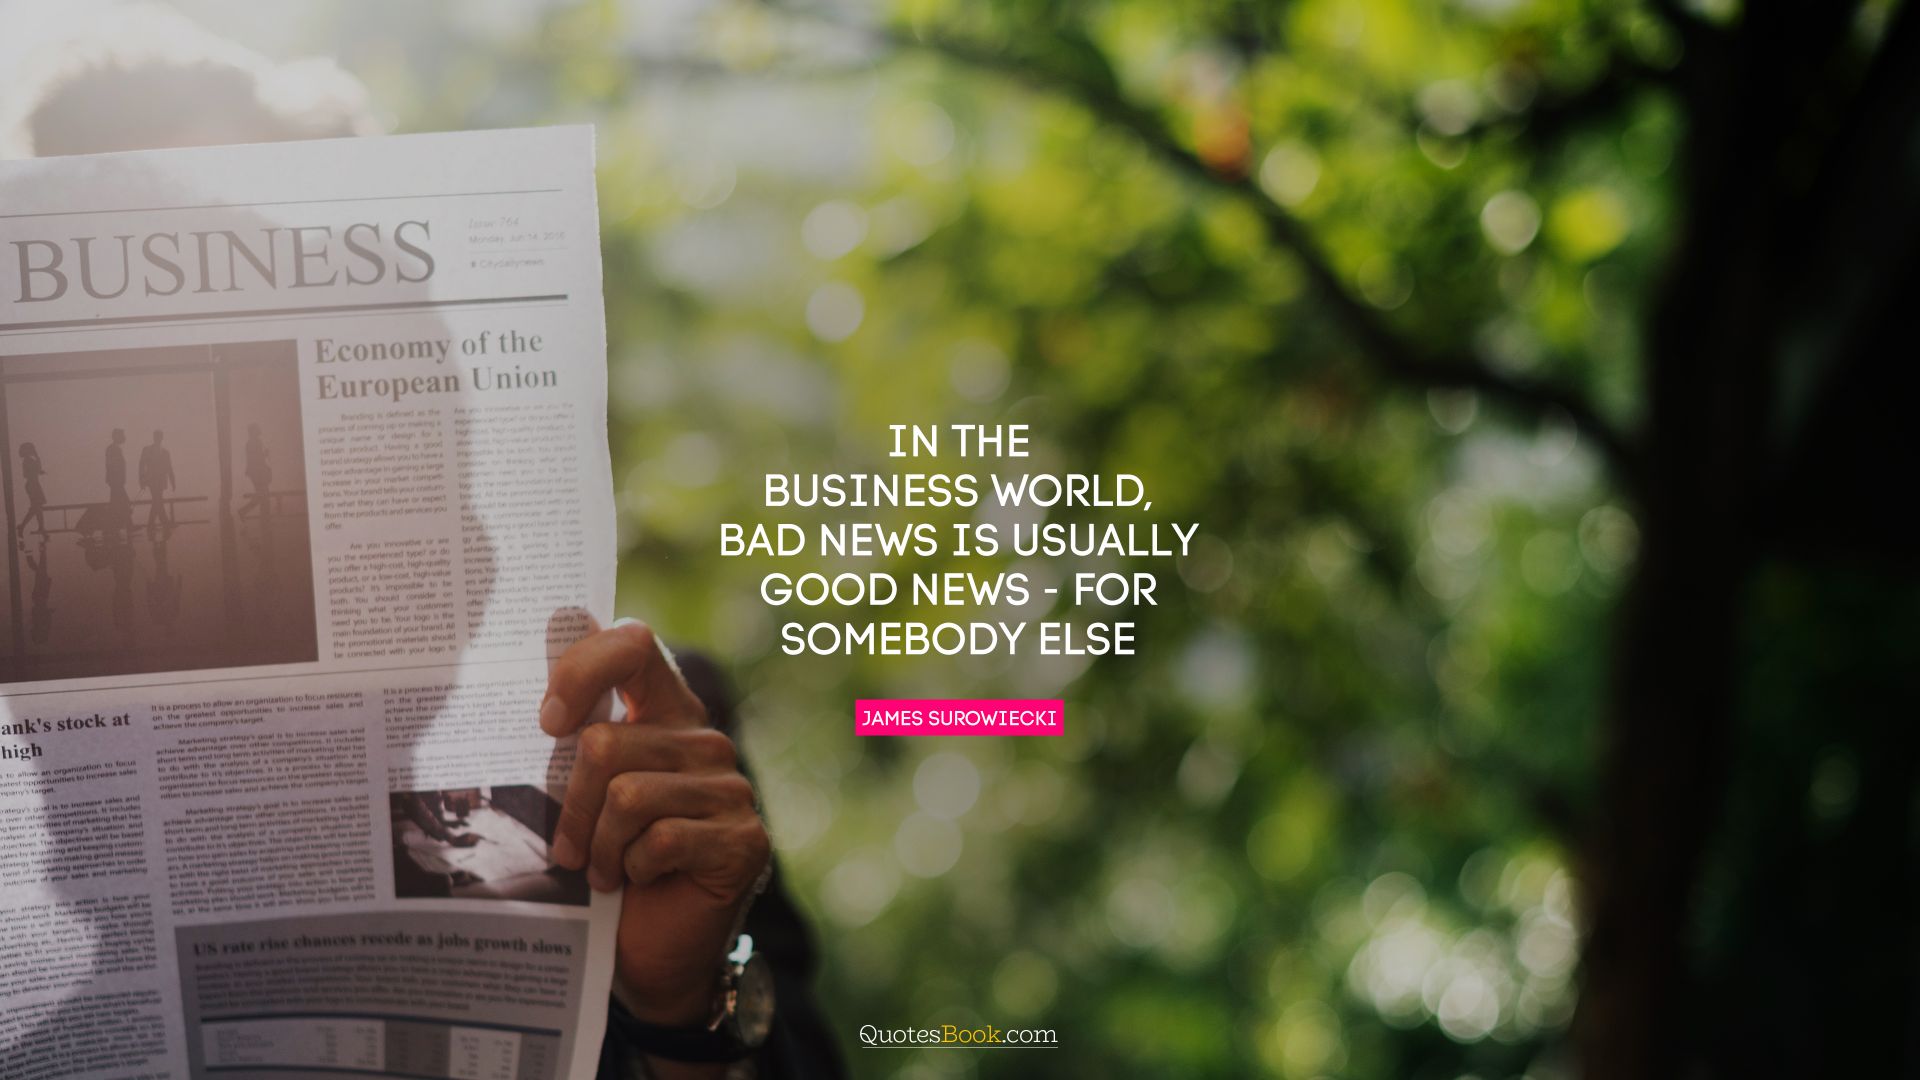 In the business world, bad news is usually good news - for somebody else. - Quote by James Surowiecki